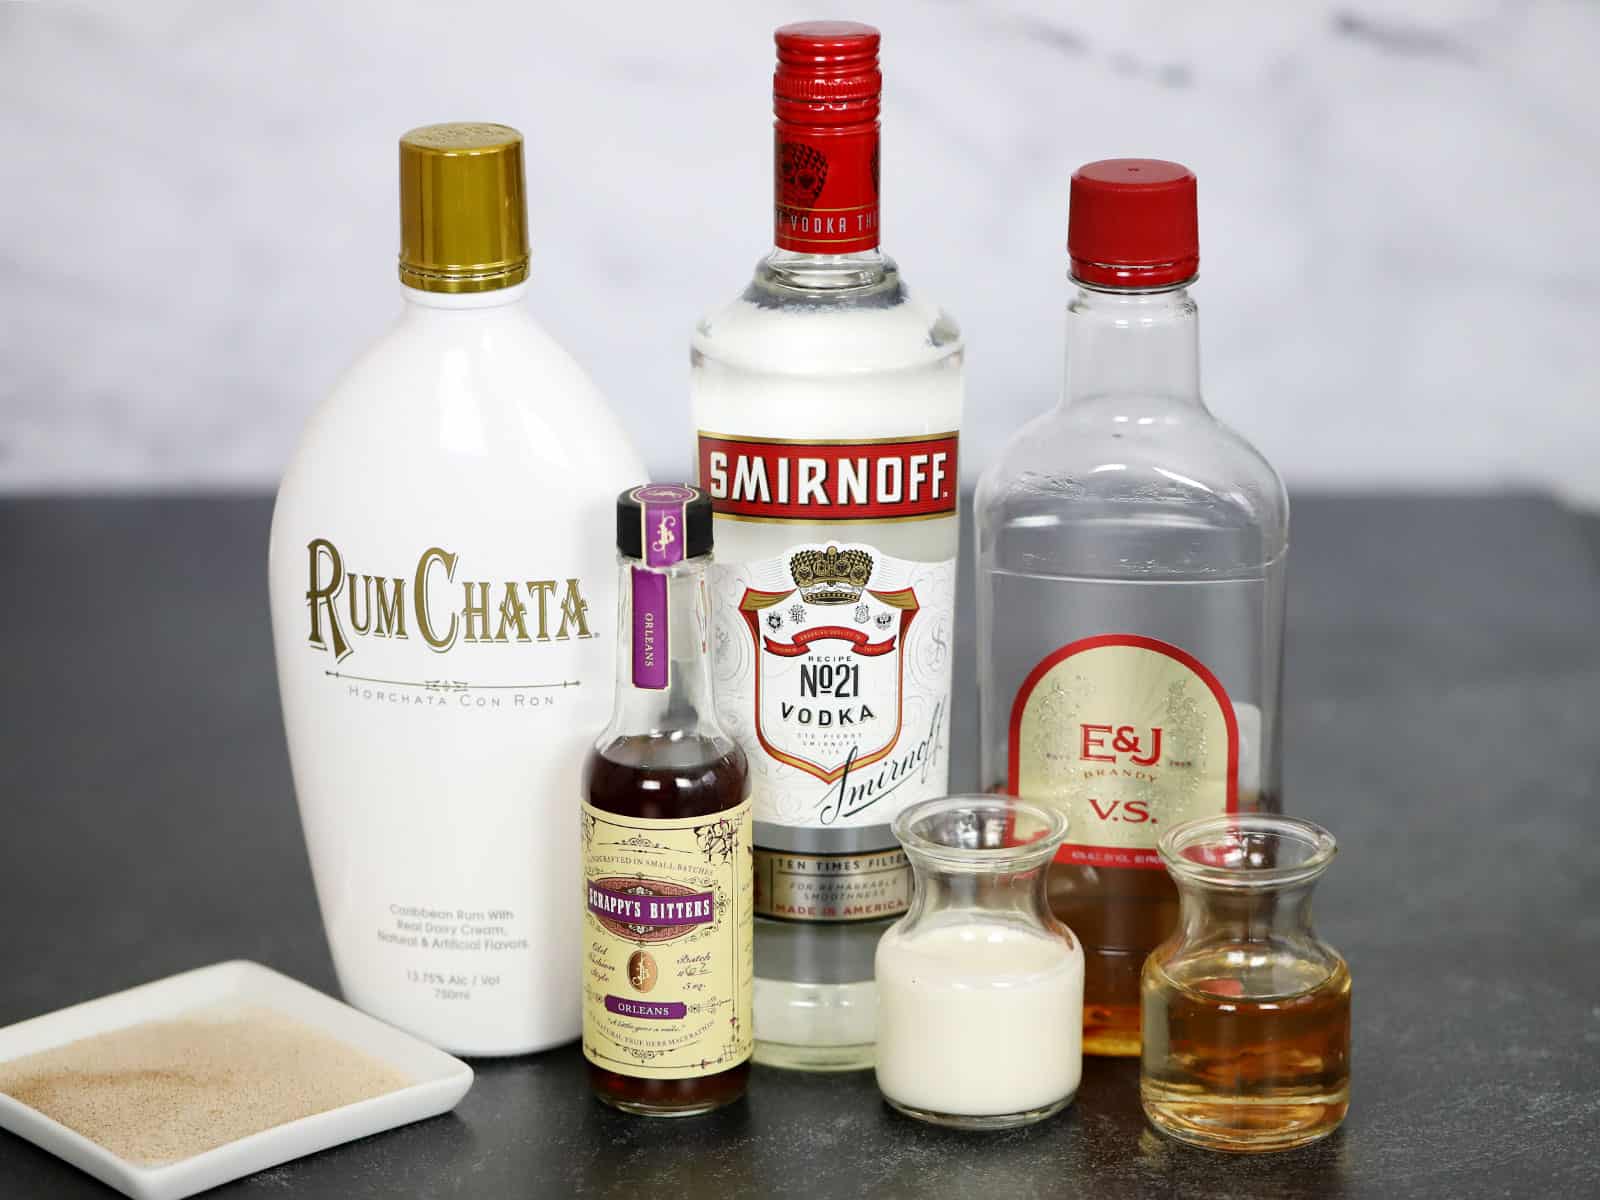 Ingredients for Holiday Spice Rumchata Martinis